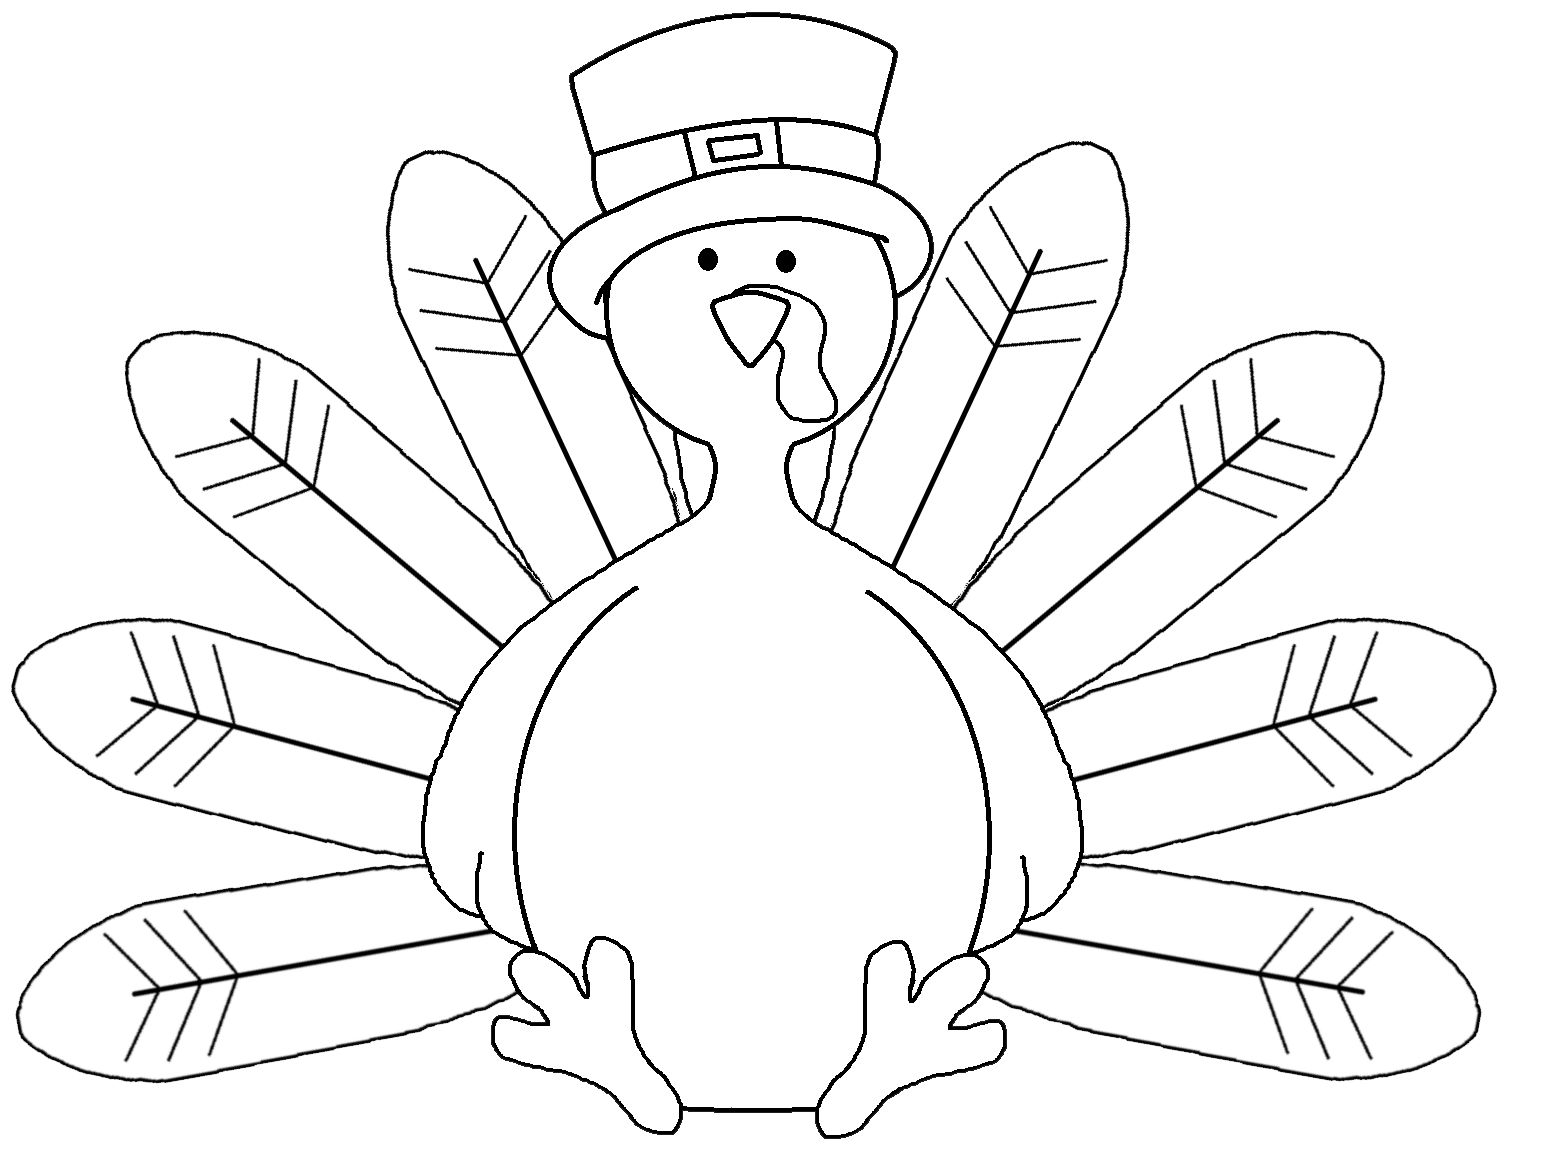 feather clipart colouring page